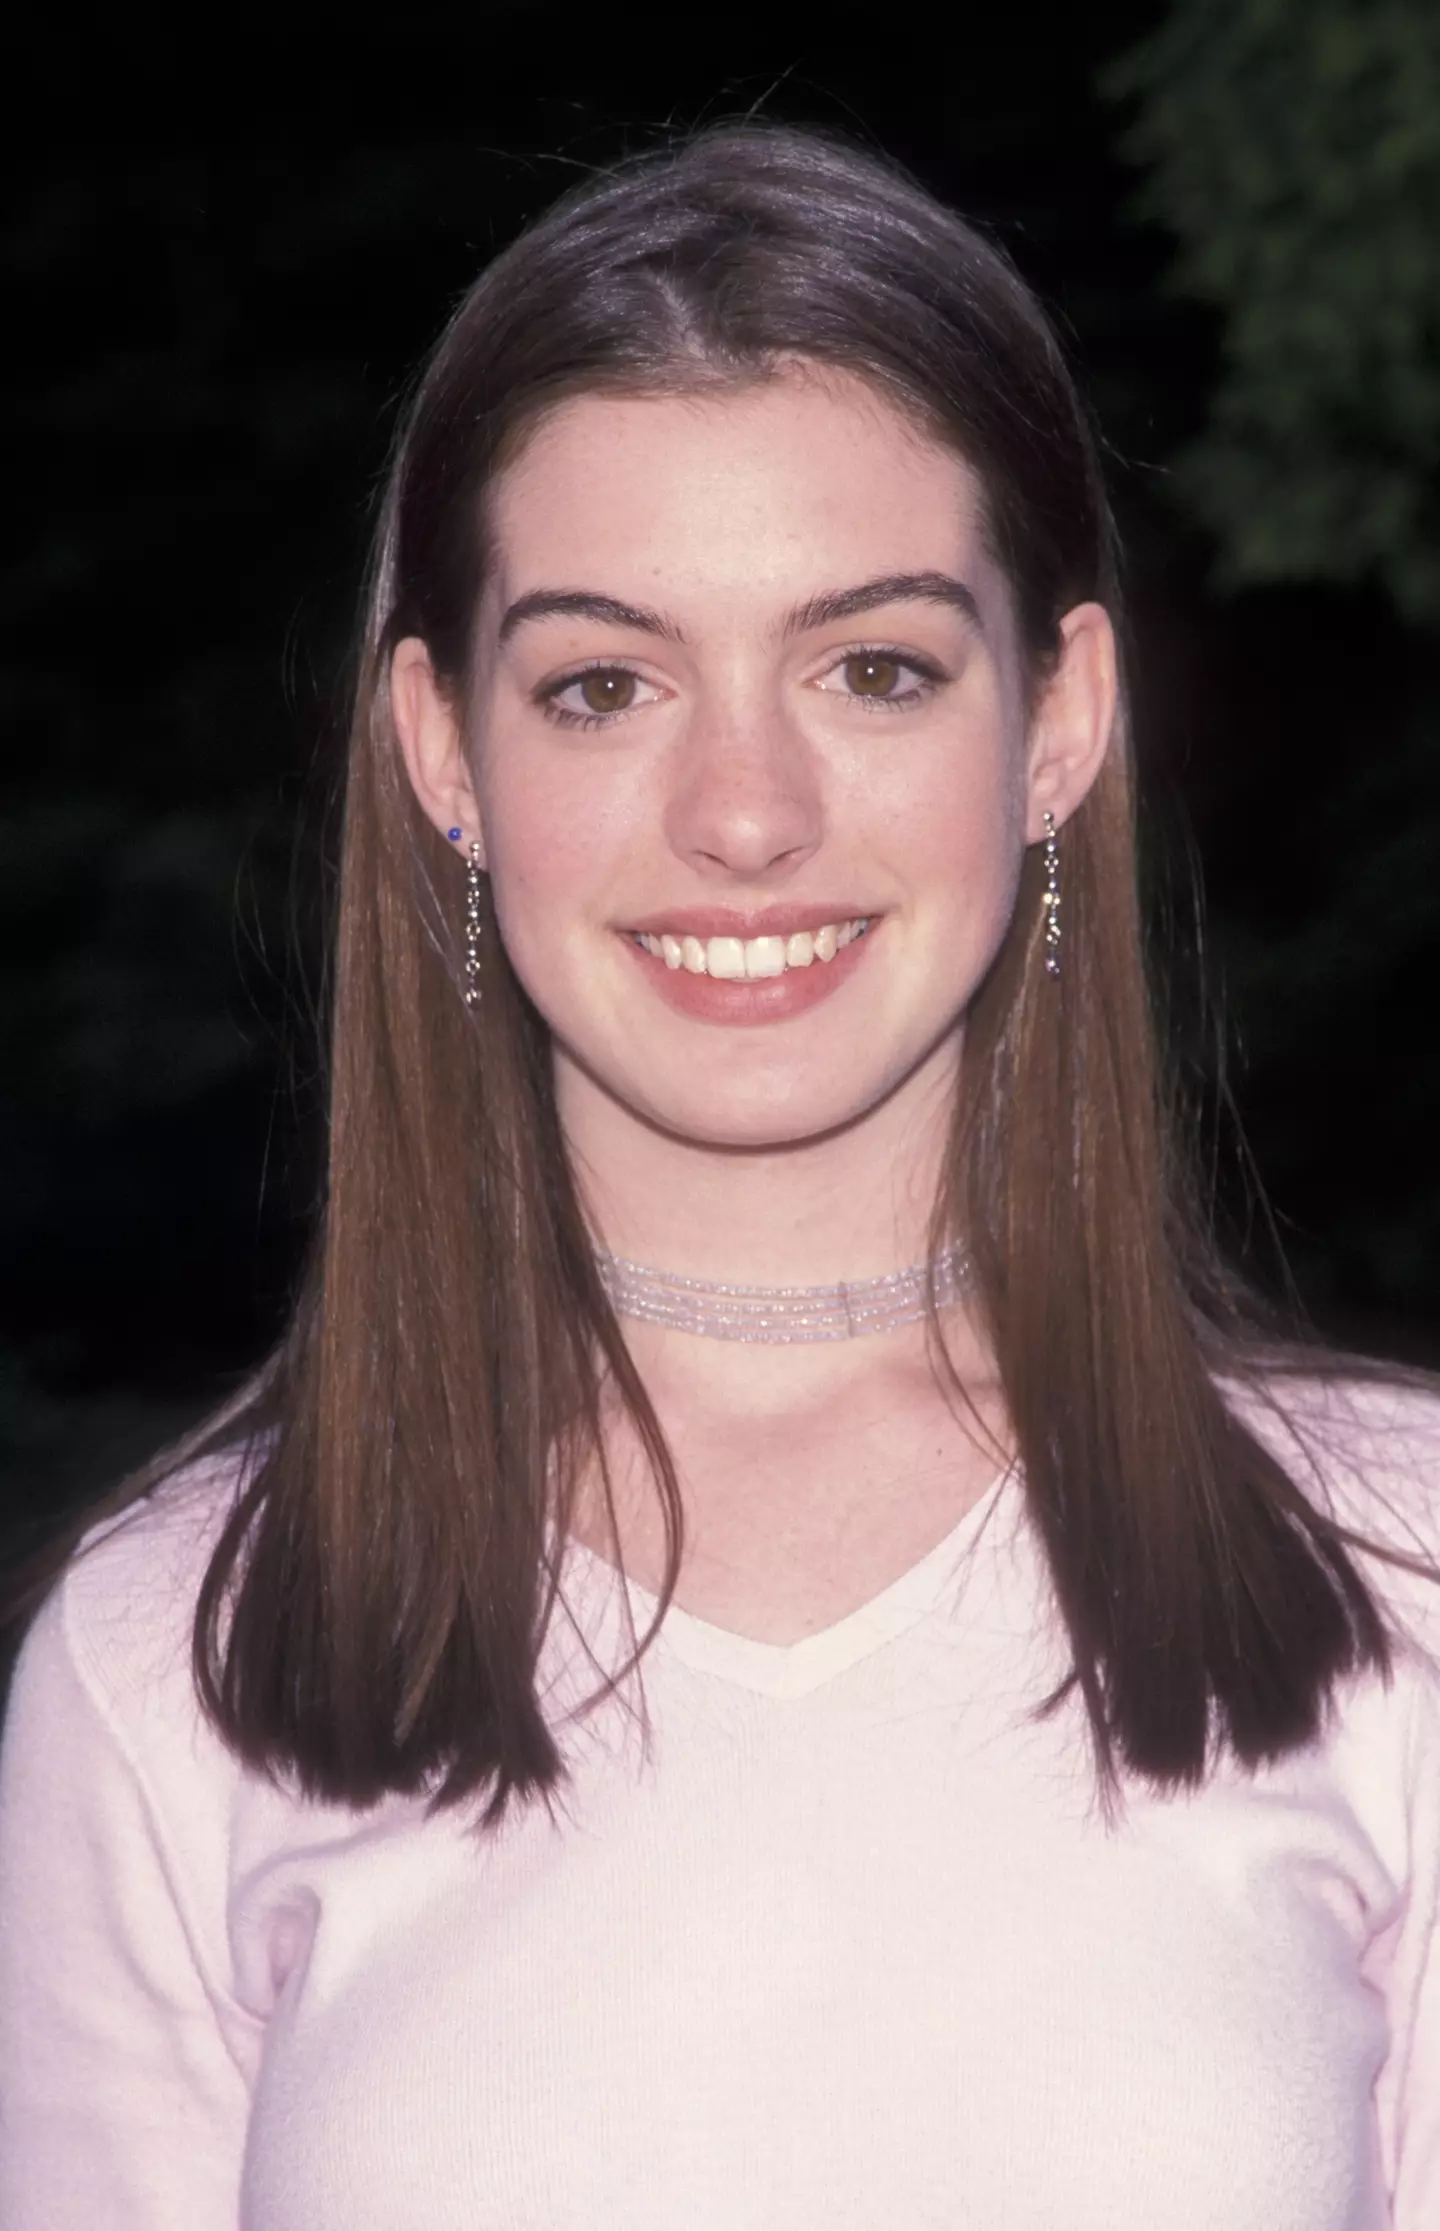 Hathaway pictured in 1999. (Ron Galella, Ltd./Ron Galella Collection via Getty Images)